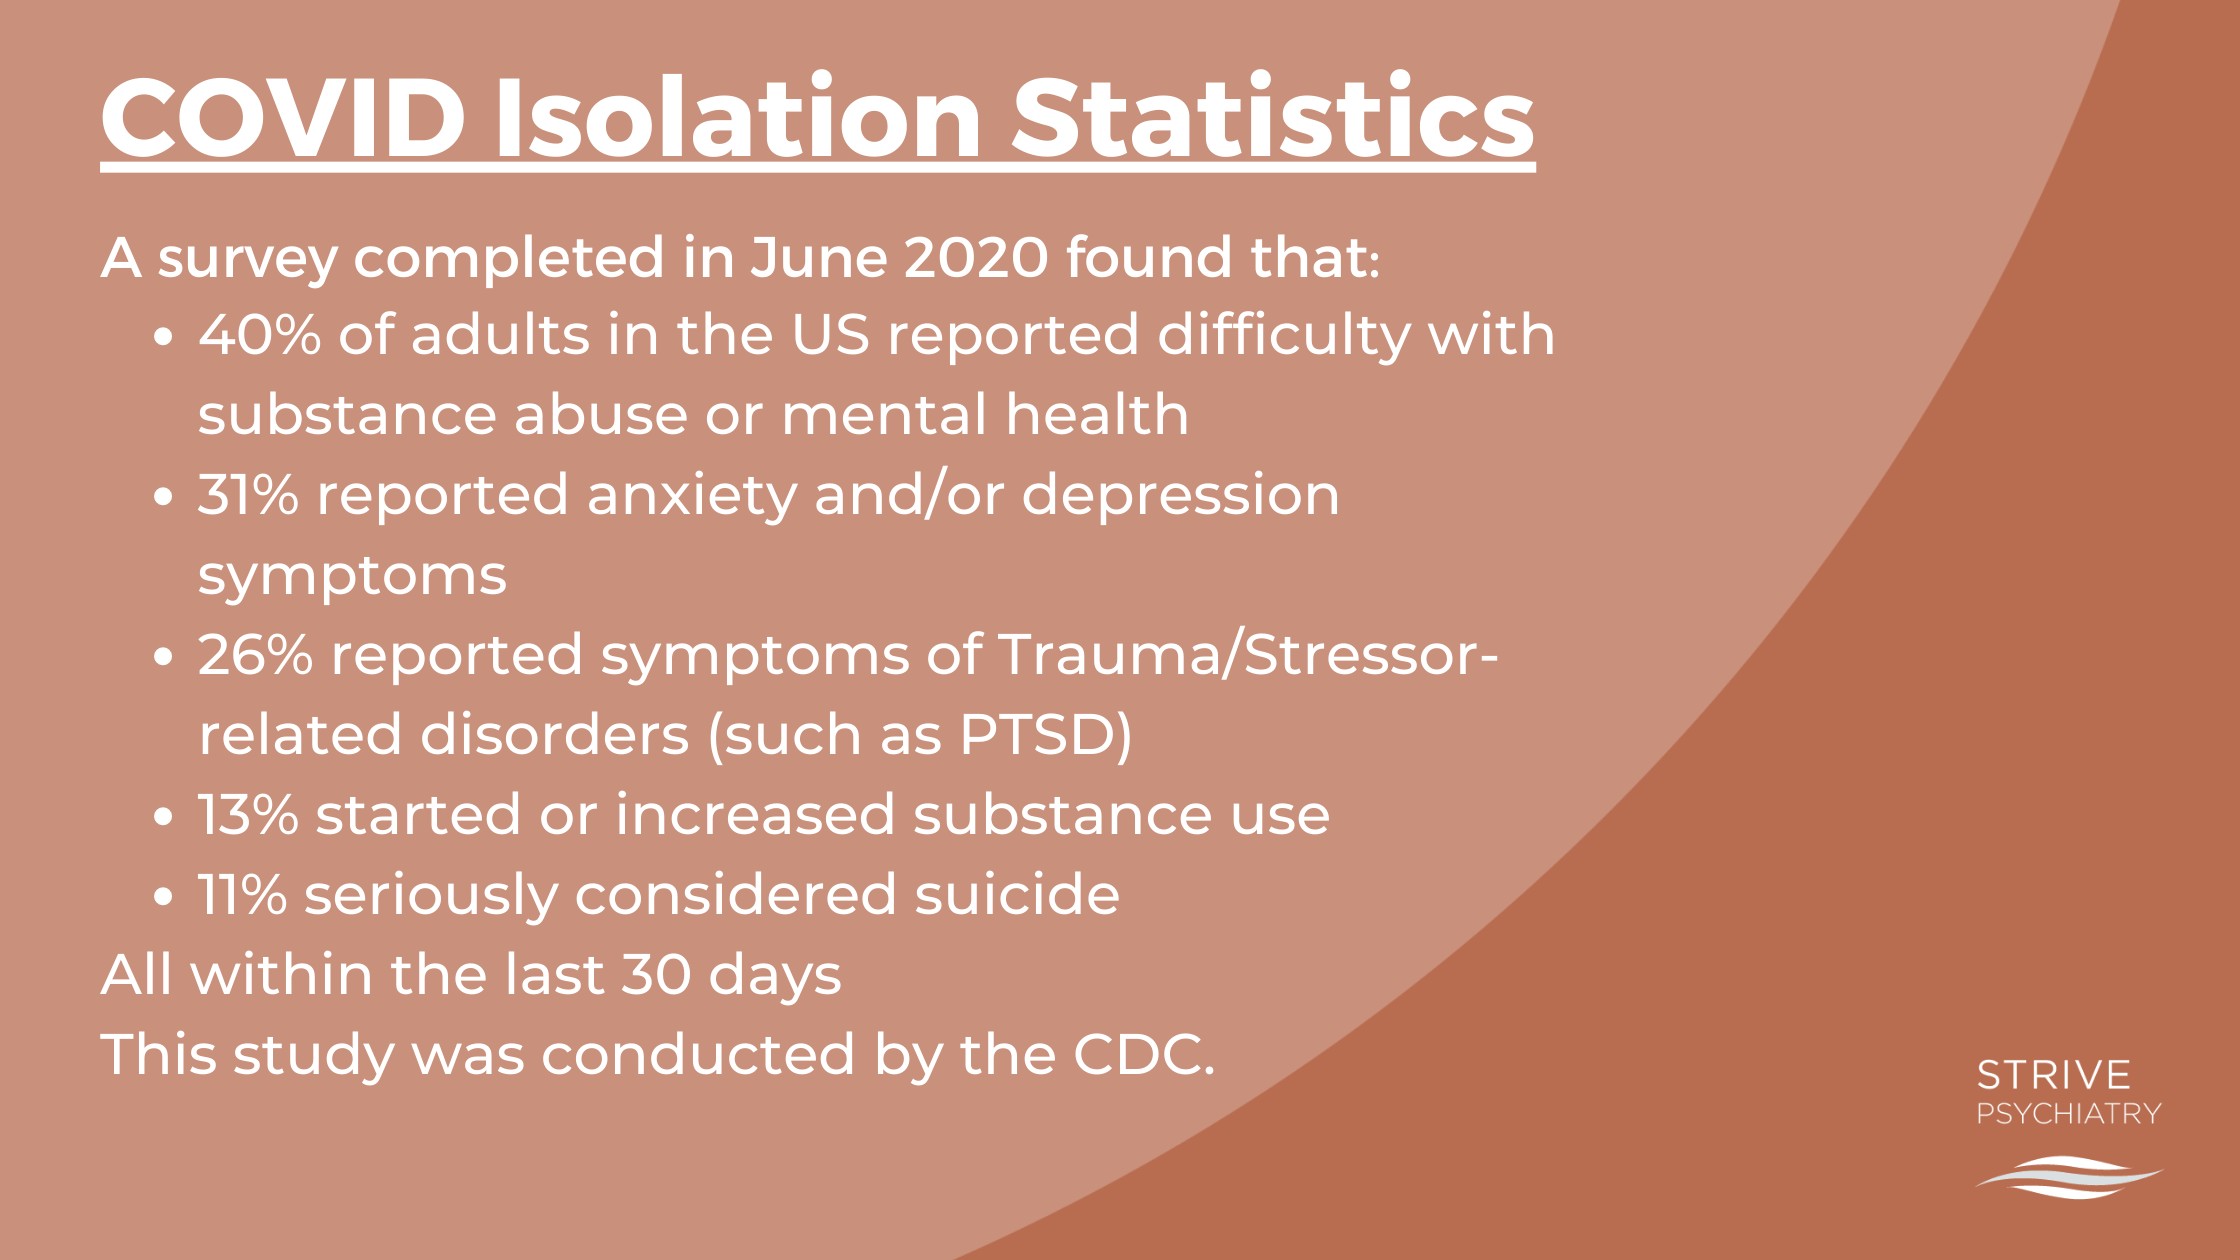 Graphic that says "COVID Isolation Statistics. A survey completed in June 2020 found that: 40% of adults in the US reported difficulty with substance abuse or mental health 31% reported anxiety and/or depression symptoms 26% reported symptoms of Trauma/Stressor-related disorders (such as PTSD) 13% started or increased substance use 11% seriously considered suicide All within the last 30 days This study was conducted by the CDC".